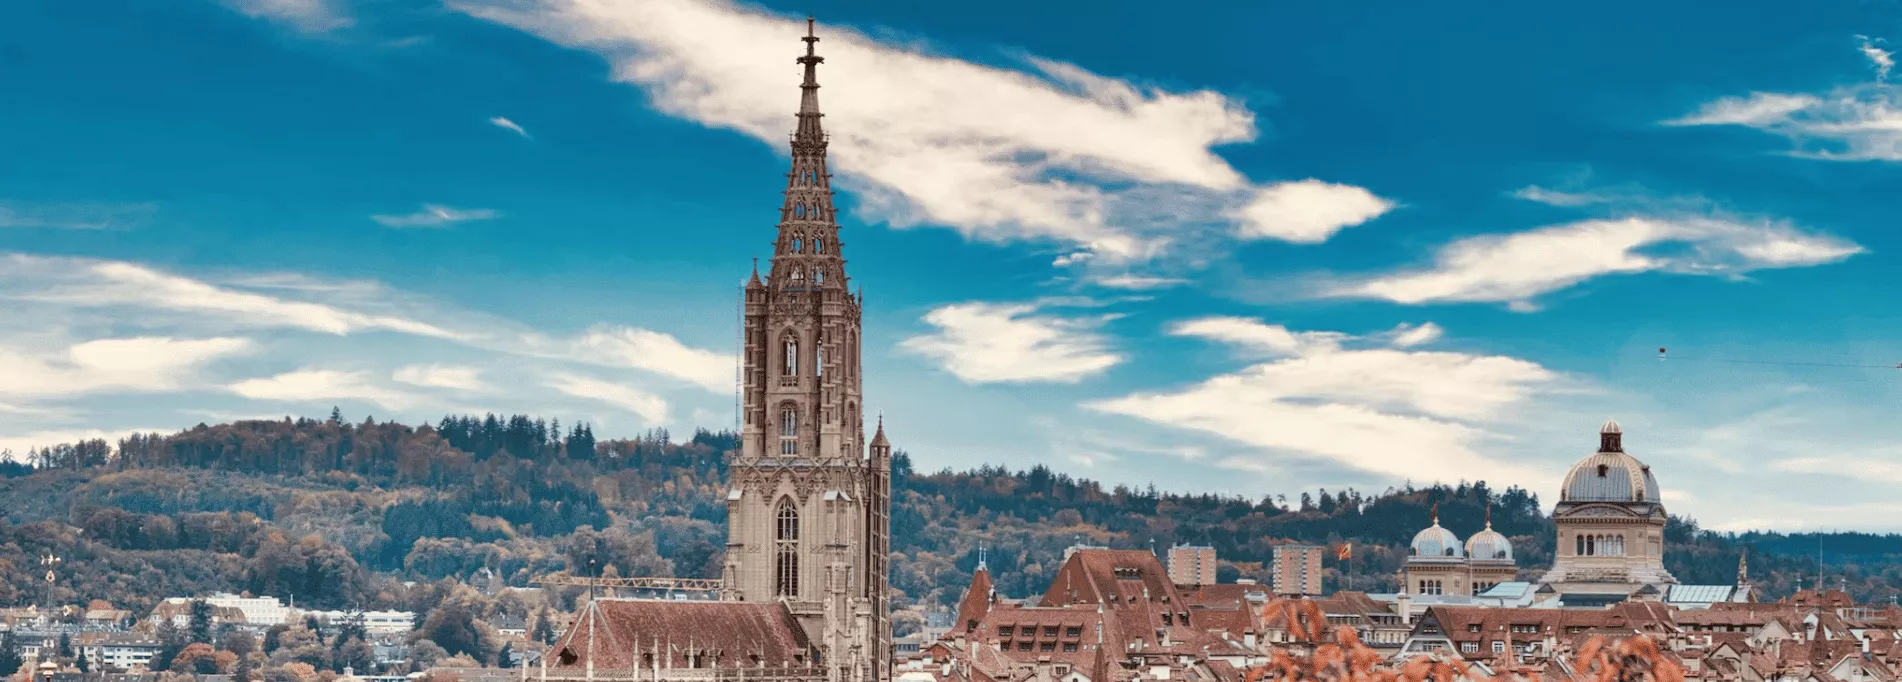 List of the 3 largest companies in Bern